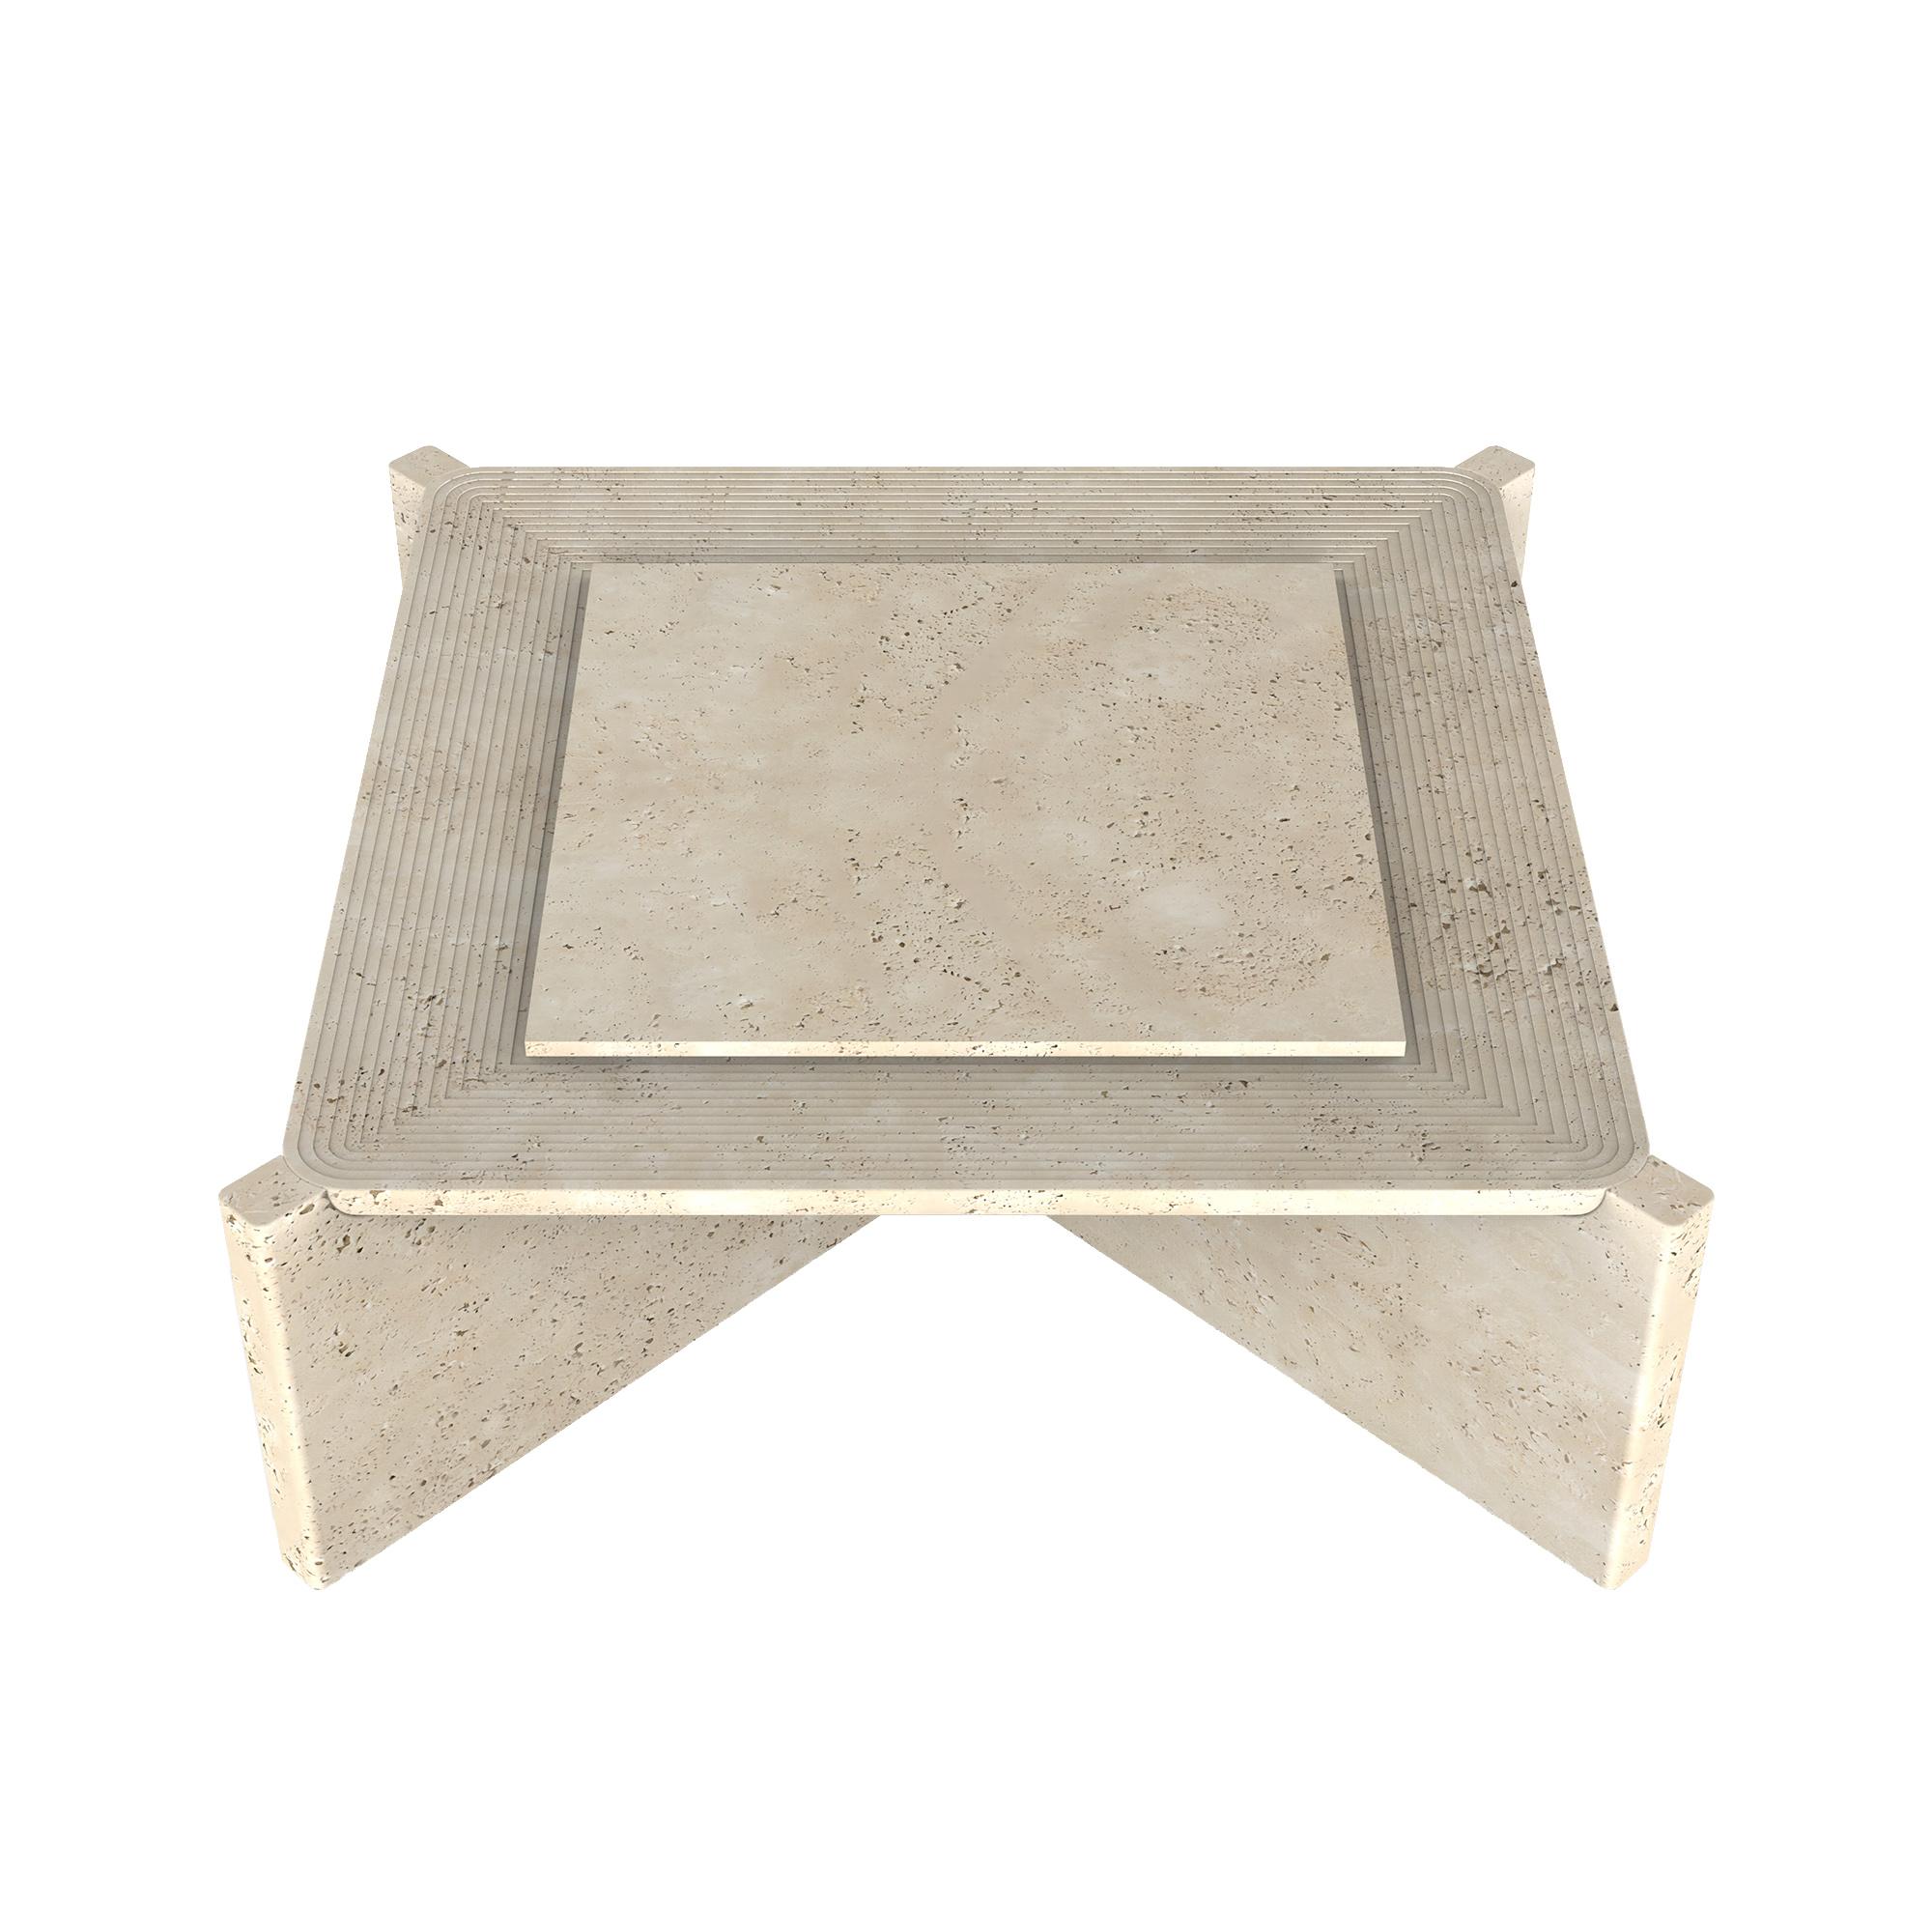 Turkish Arkhe No 2 Coffee Table Square Travertine, Modern Sculptural by Fulden Topaloglu For Sale